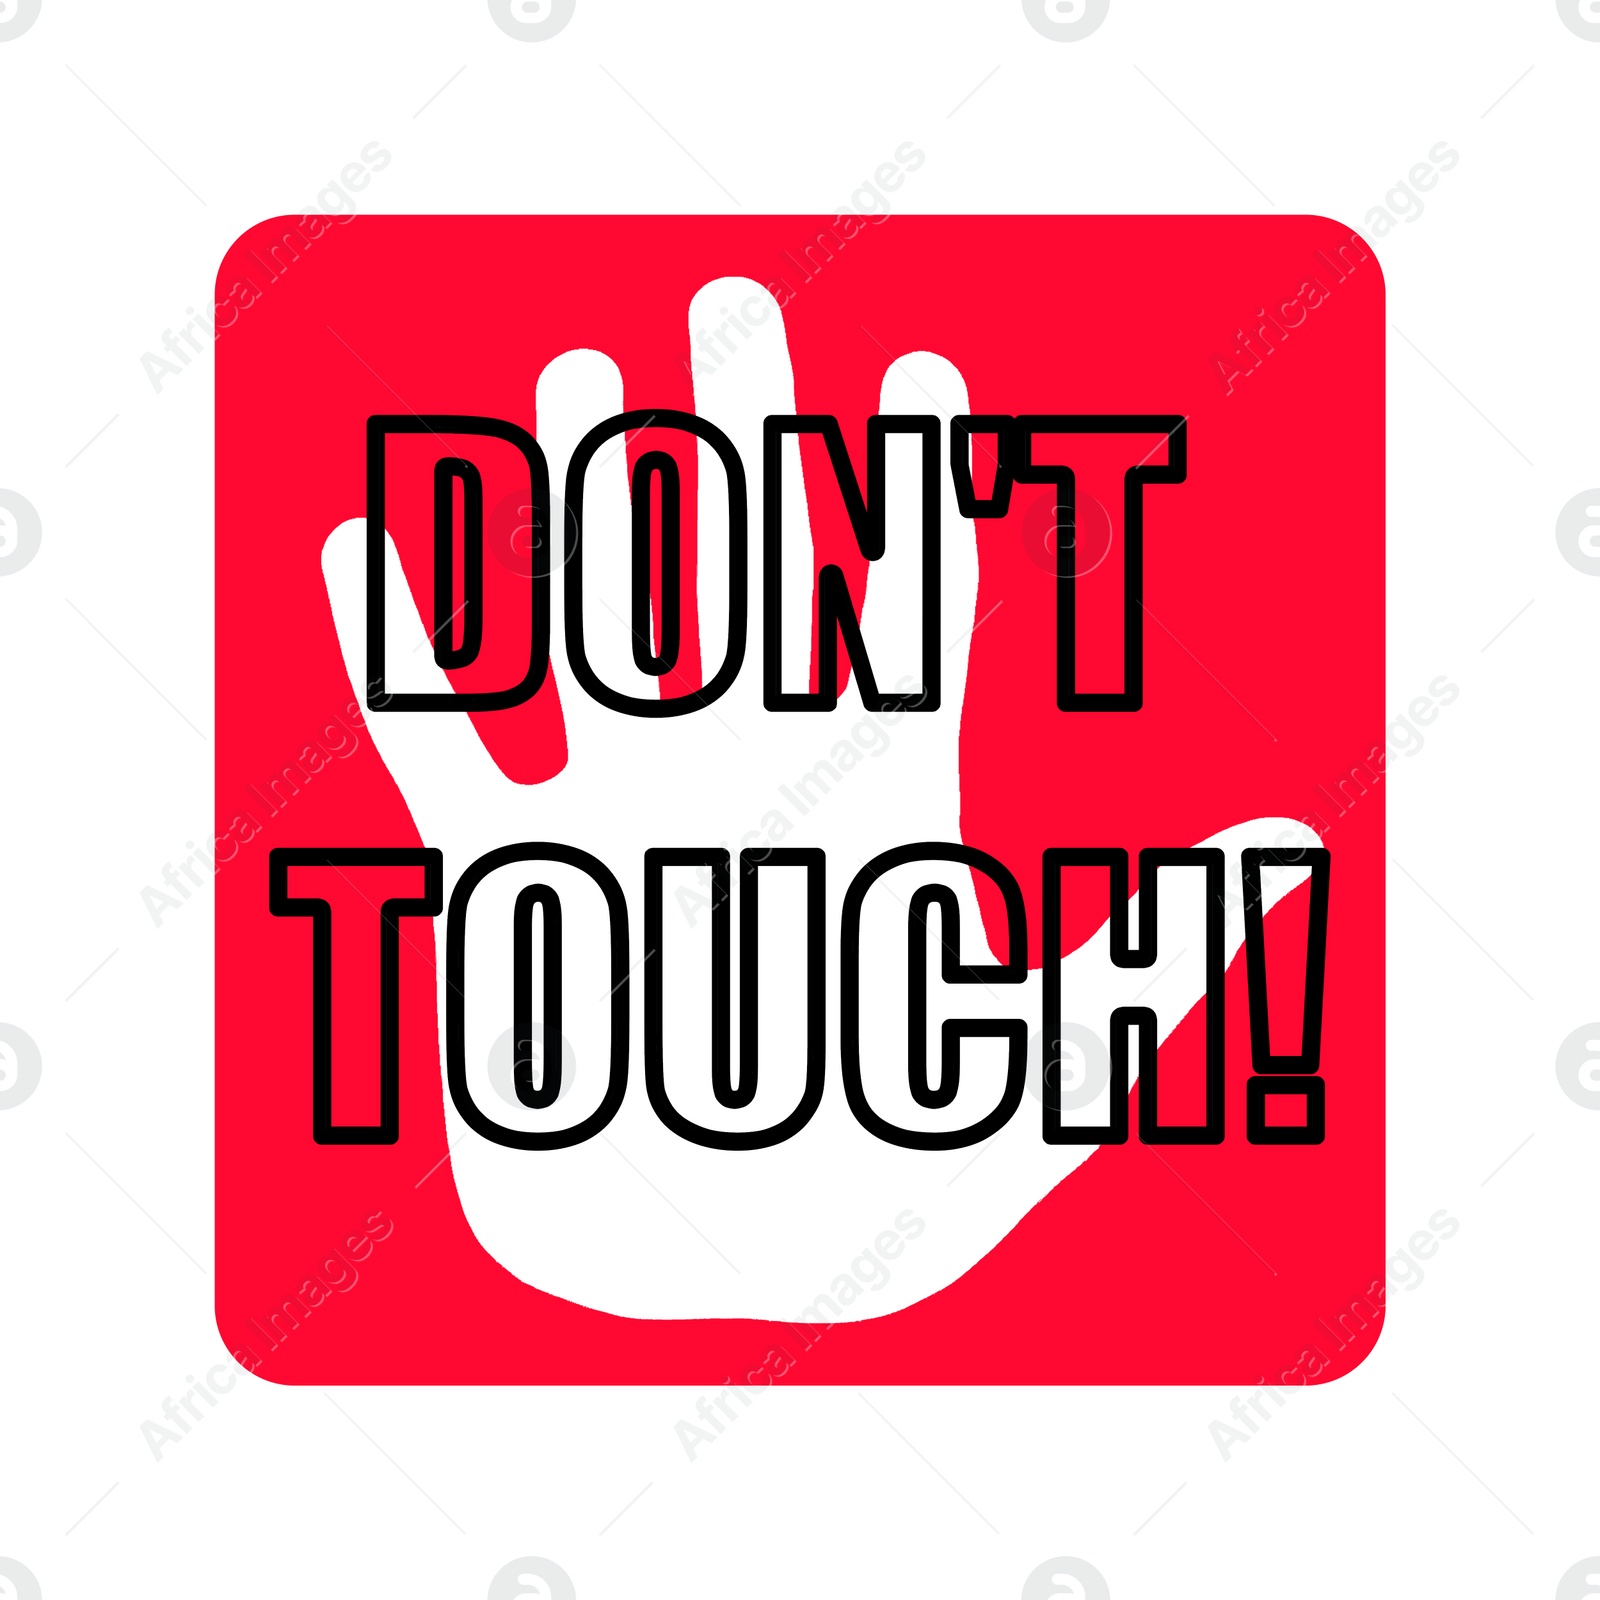 Illustration of Don't Touch!  hand as important measure during coronavirus outbreak